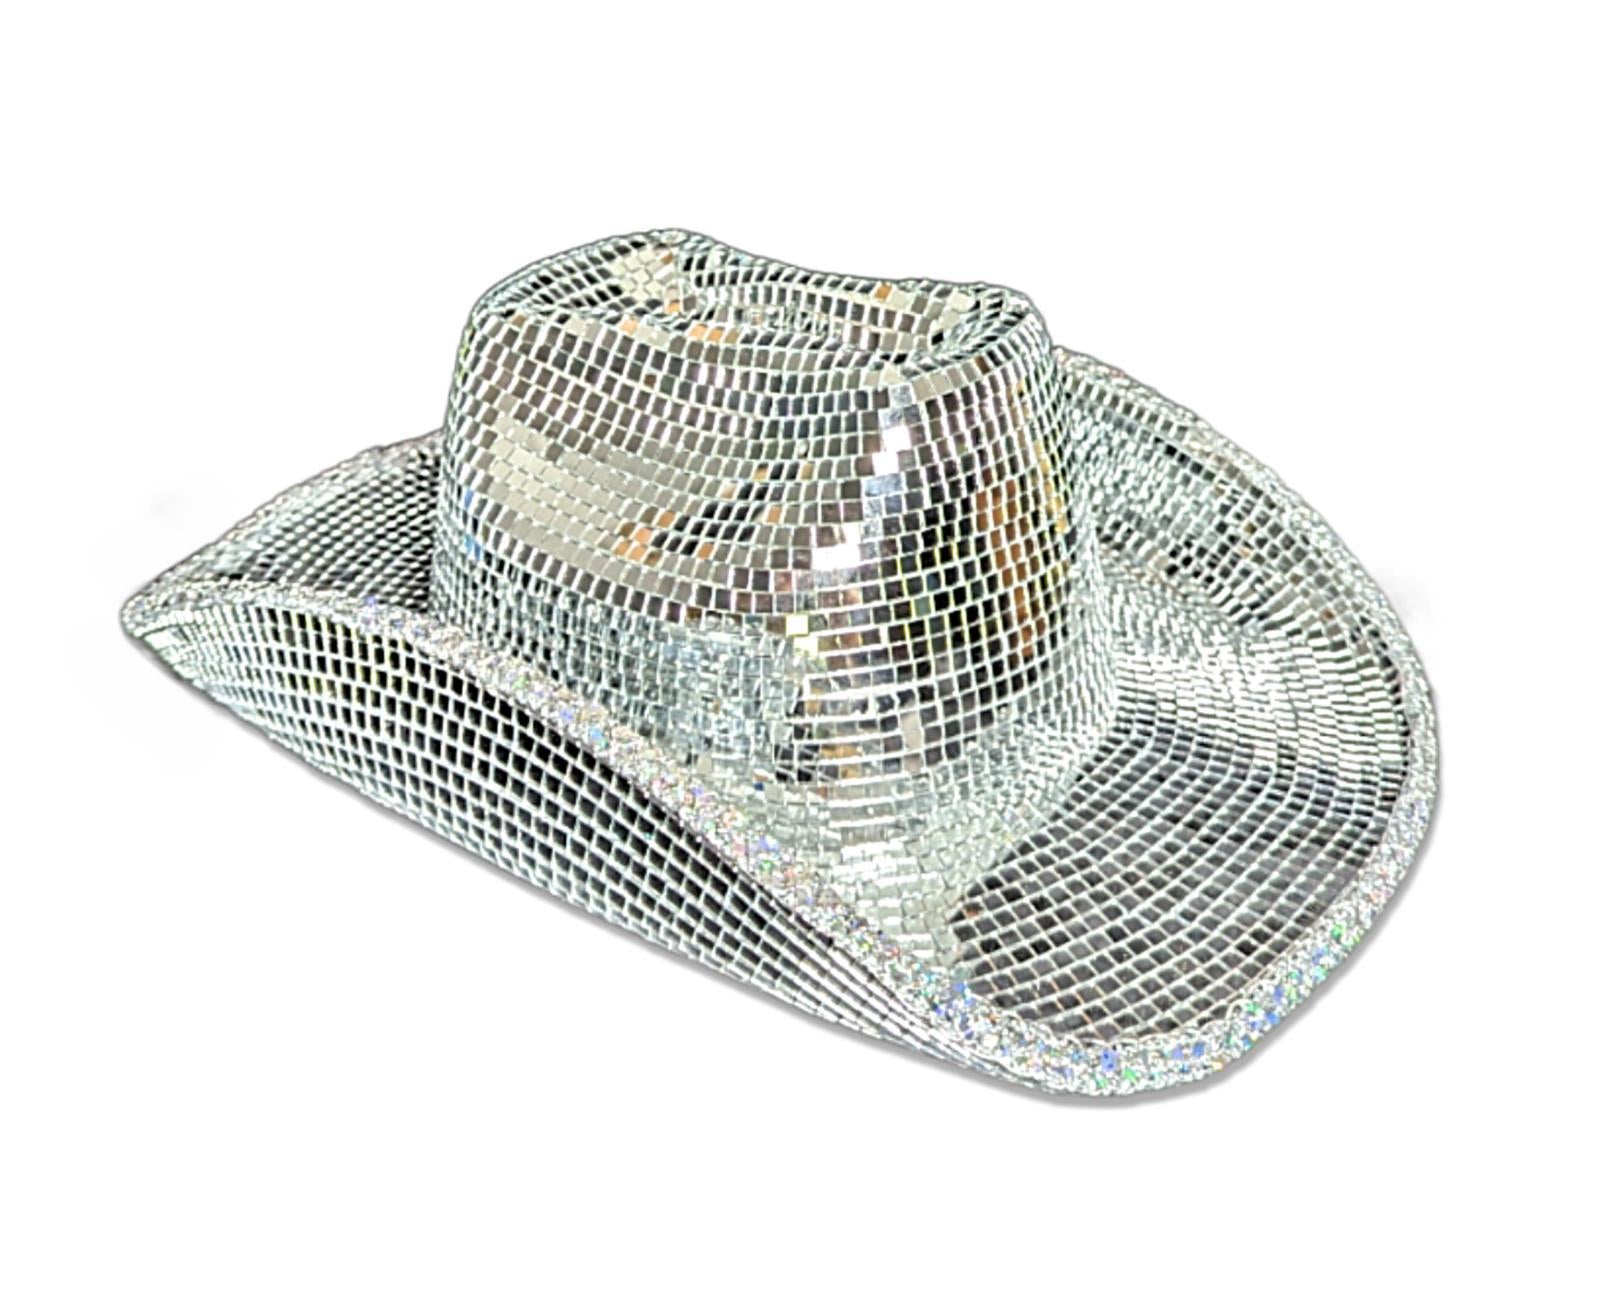 Hat Cowboy/Cowgirl Disco 1970s Mirror Ball Silver Super Deluxe